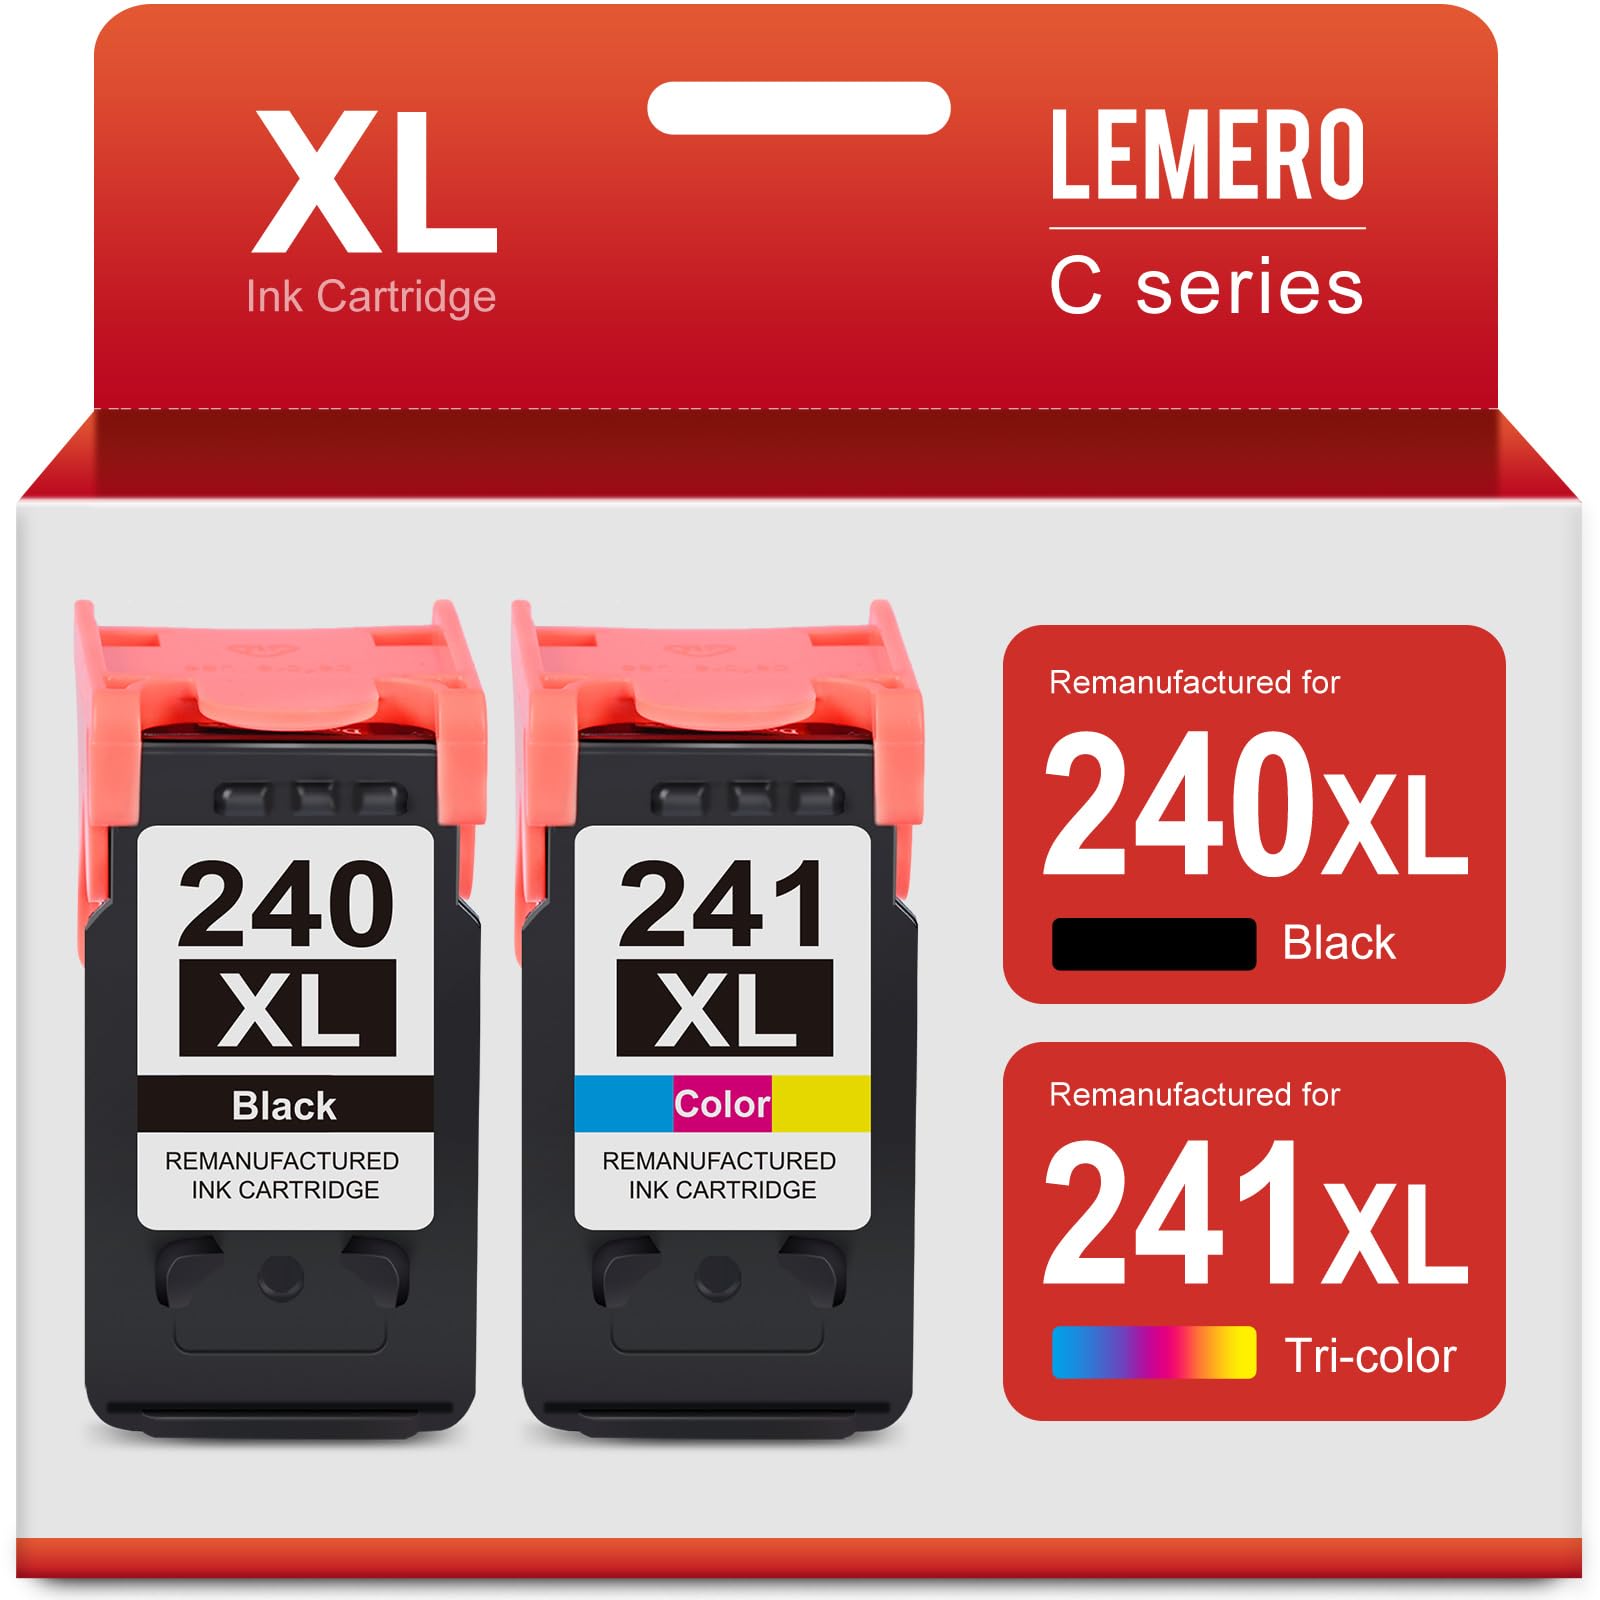 LEMERO XL ink cartridge pack for 240XL black and 241XL tri-color